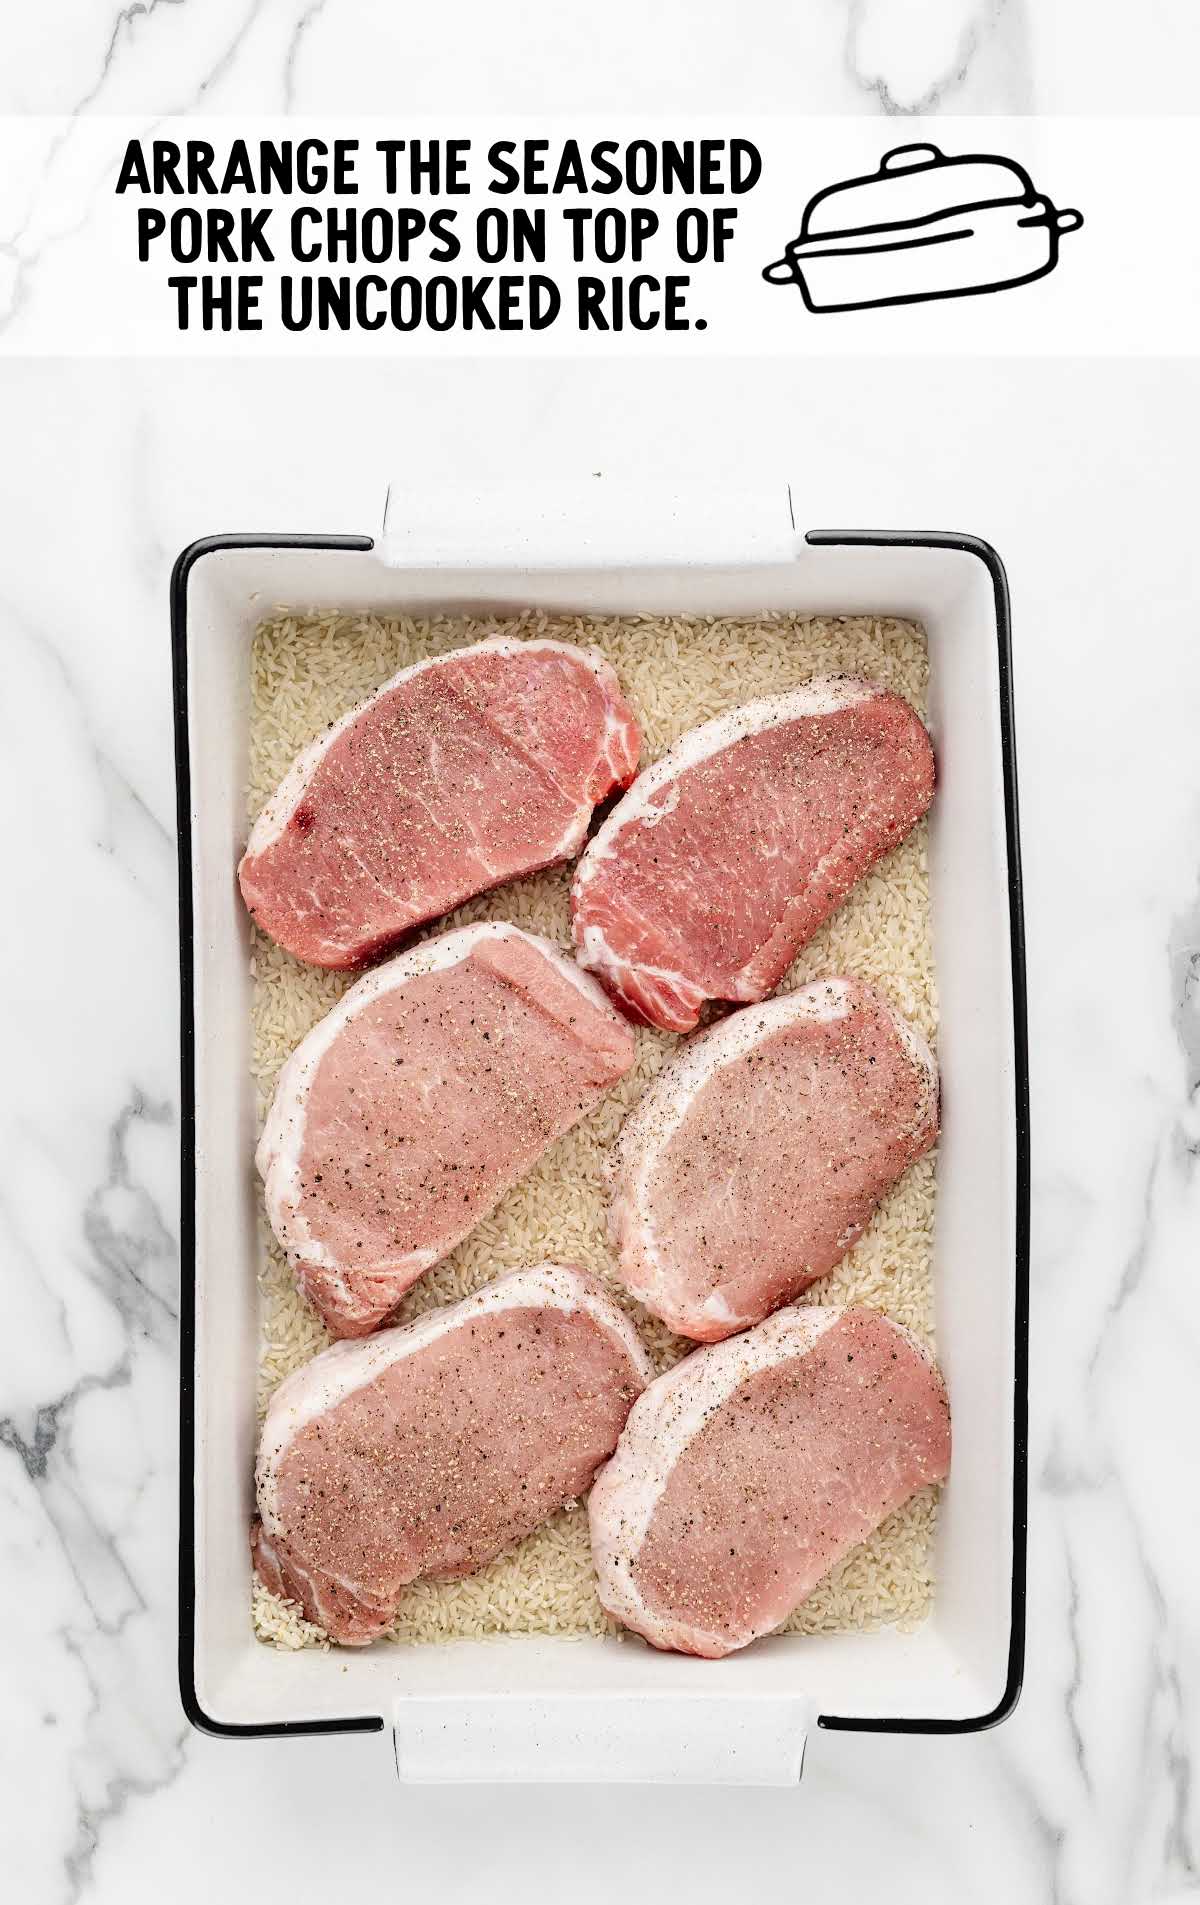 seasoned boneless pork chops placed on top of the uncooked rice in the baking dish